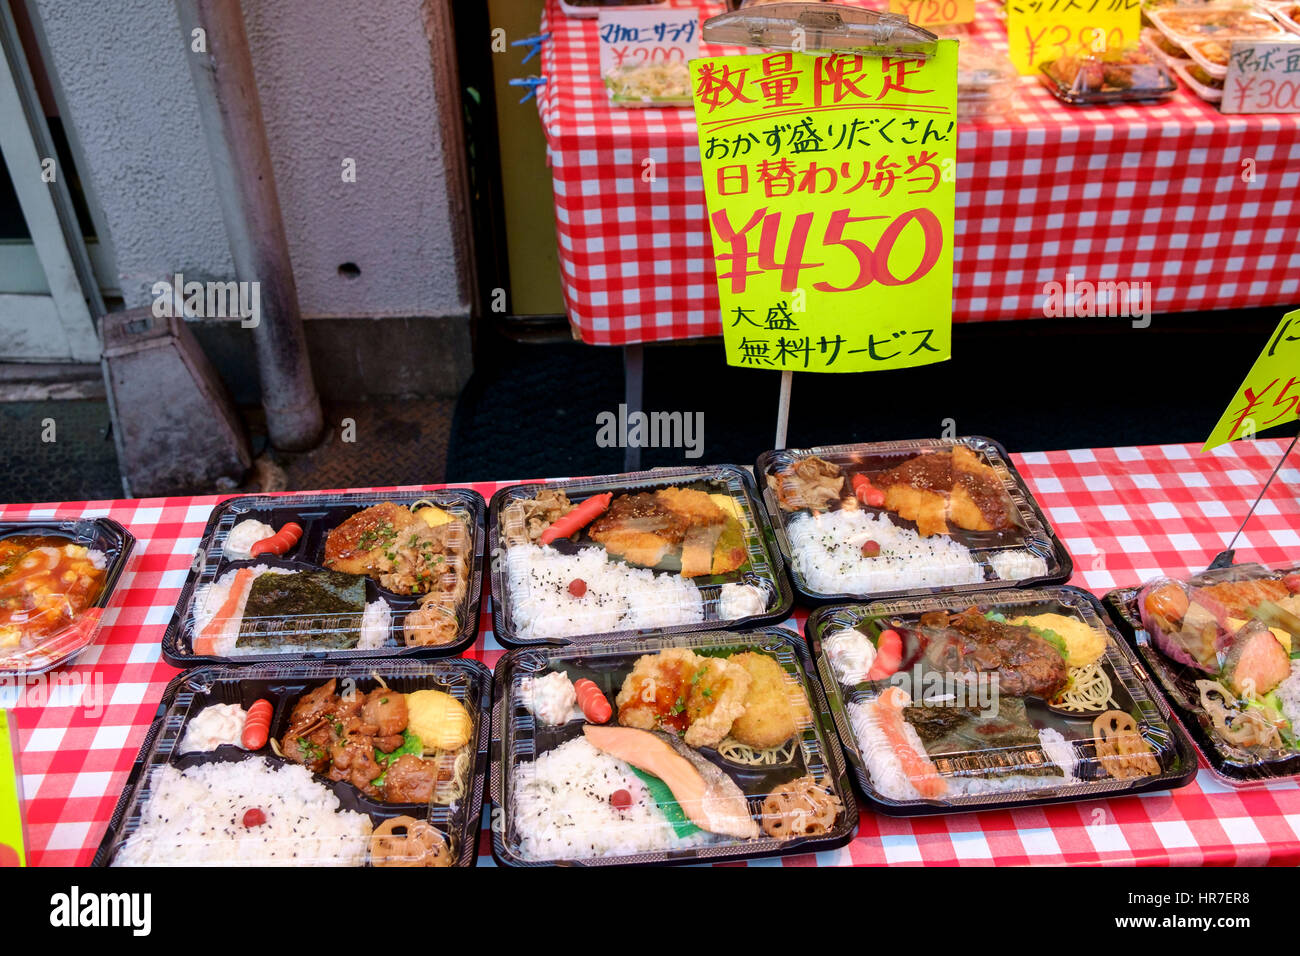 https://c8.alamy.com/comp/HR7ER8/a-street-stall-selling-japanese-bento-boxes-takeawaay-lunch-boxes-HR7ER8.jpg